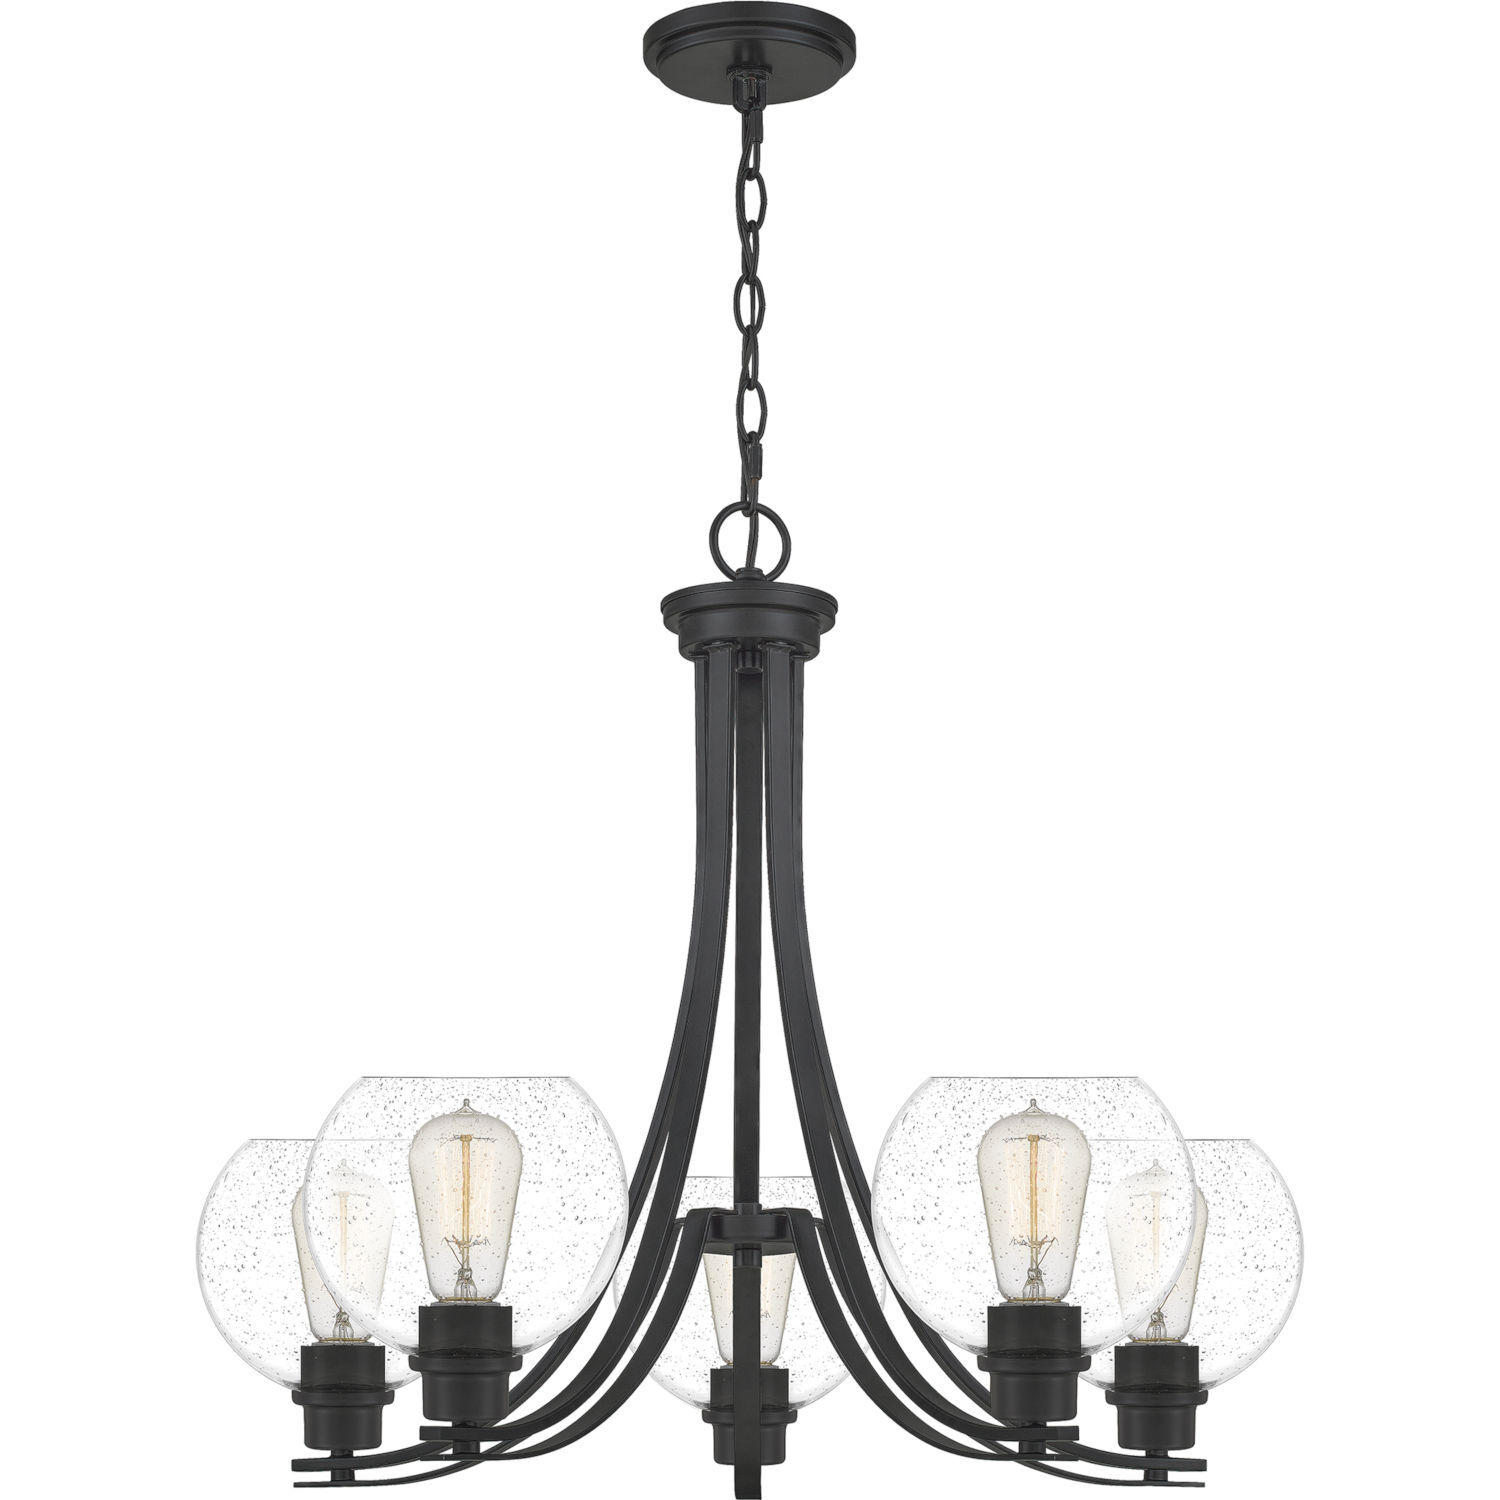 Pruitt Matte Black Dome Shade Five-Light Chandelier with Seedy Glass